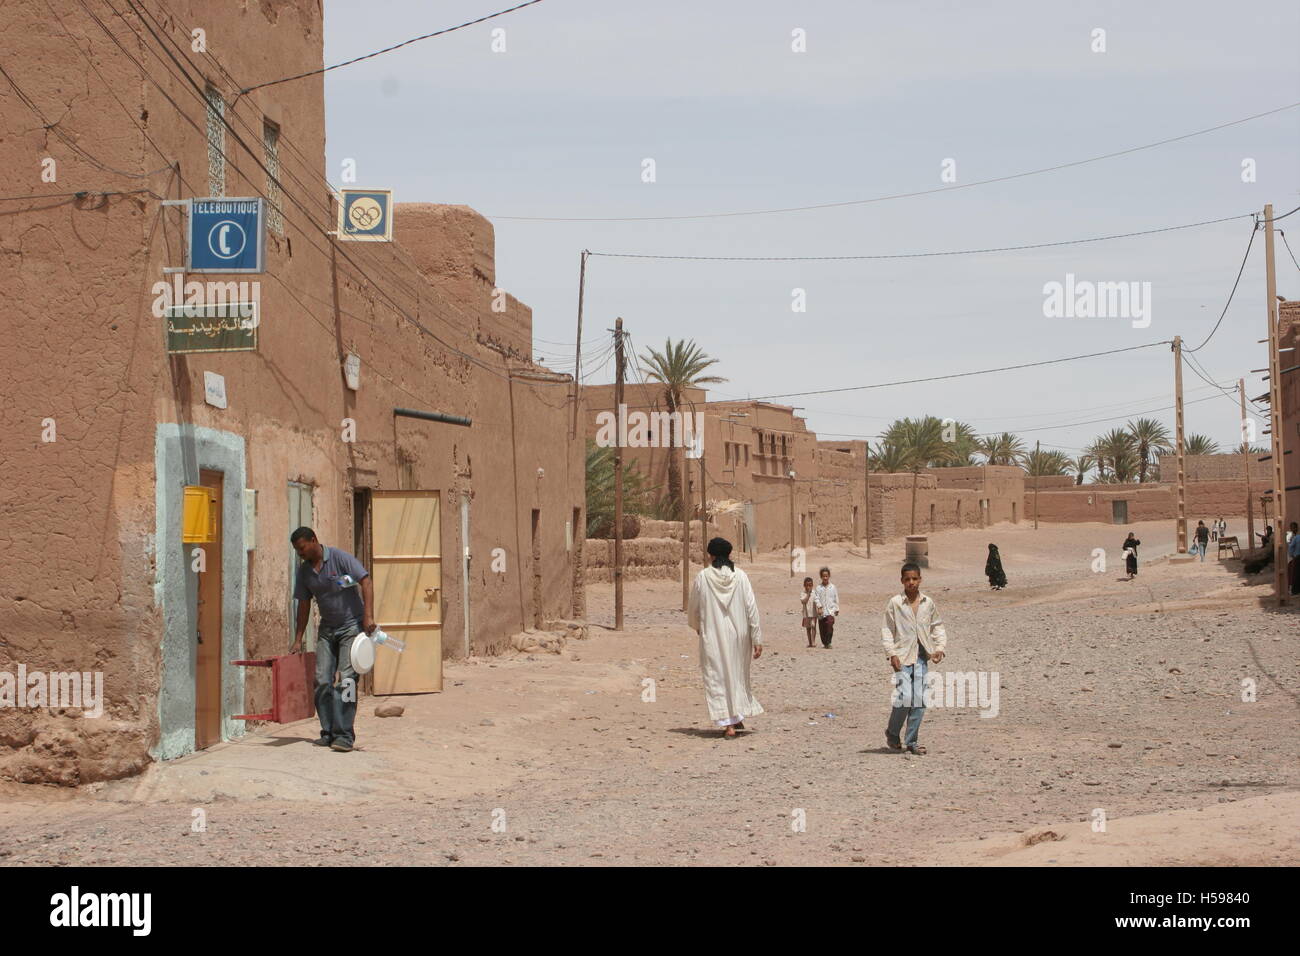 Main street of a small desert town in the Sahara desert, Southern Morocco. Shown mud-brick buildings and man in traditional robe Stock Photo